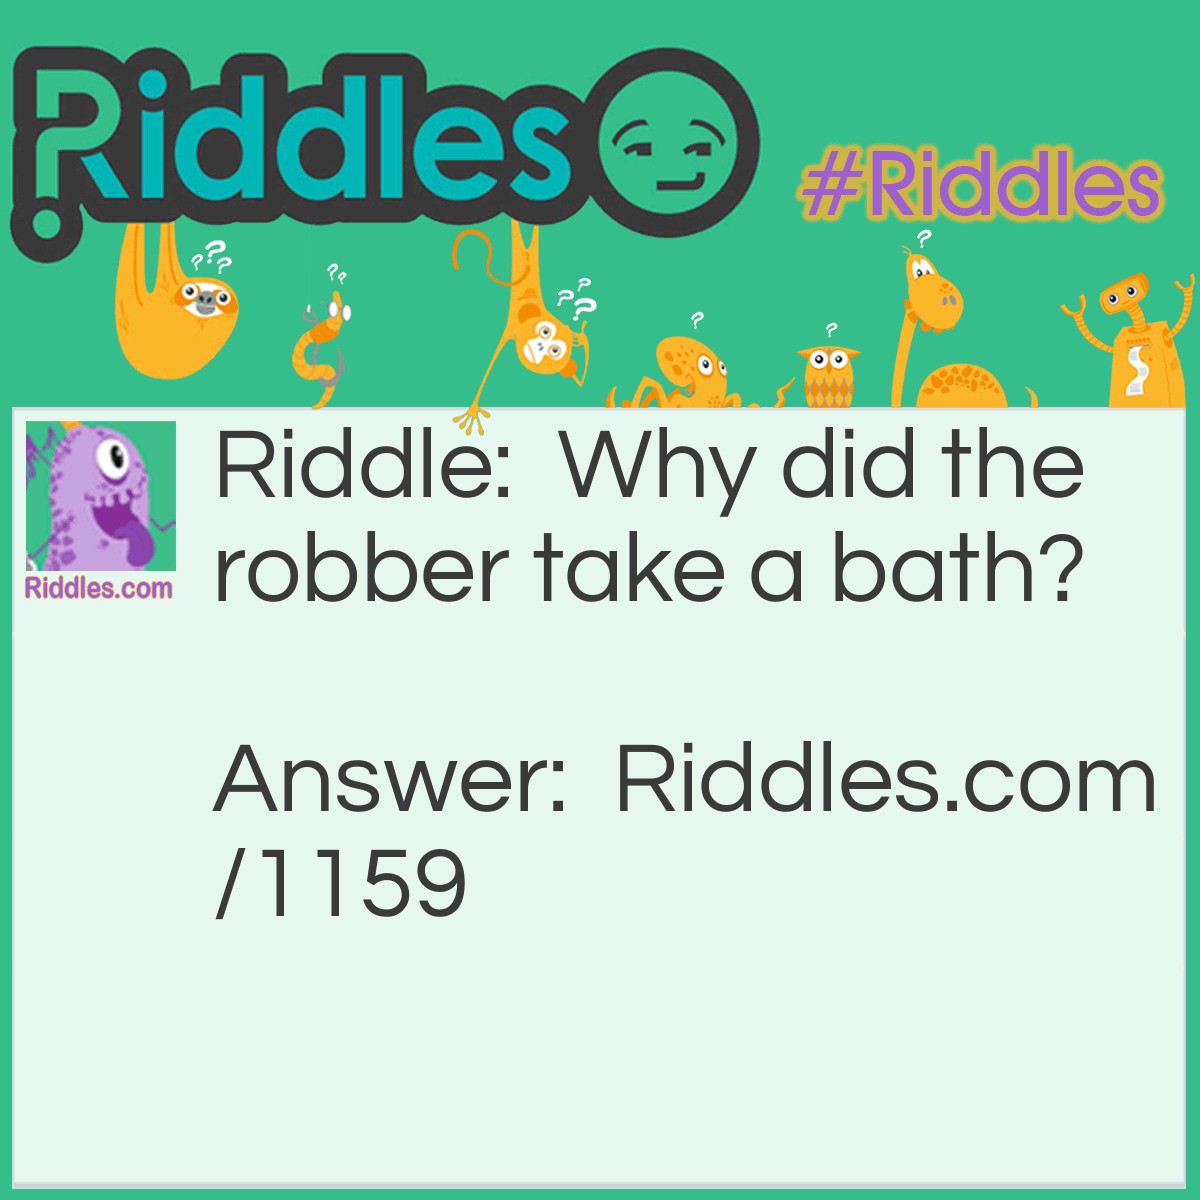 Riddle: Why did the robber take a bath? Answer: He wanted to make a clean get away!